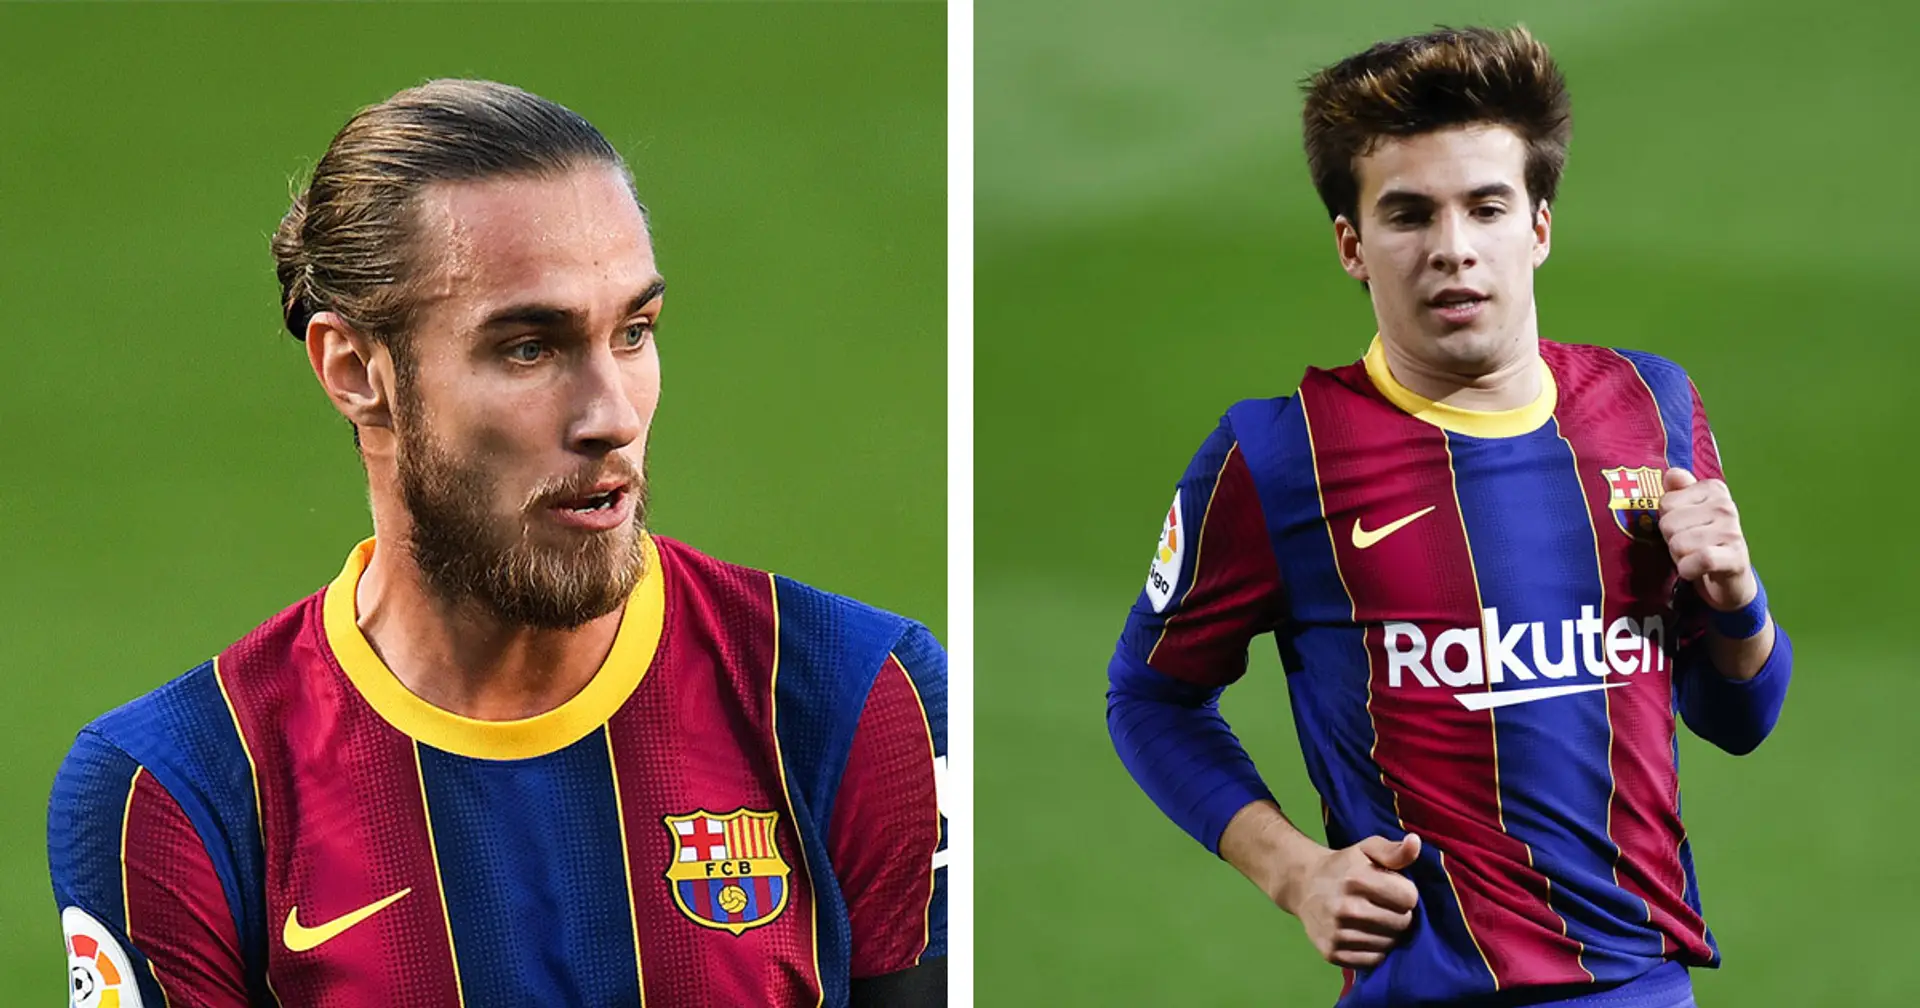 Barcelona to trigger 2-year extensions in Mingueza and Puig's contracts: Fabrizio Romano (reliability: 5 stars)